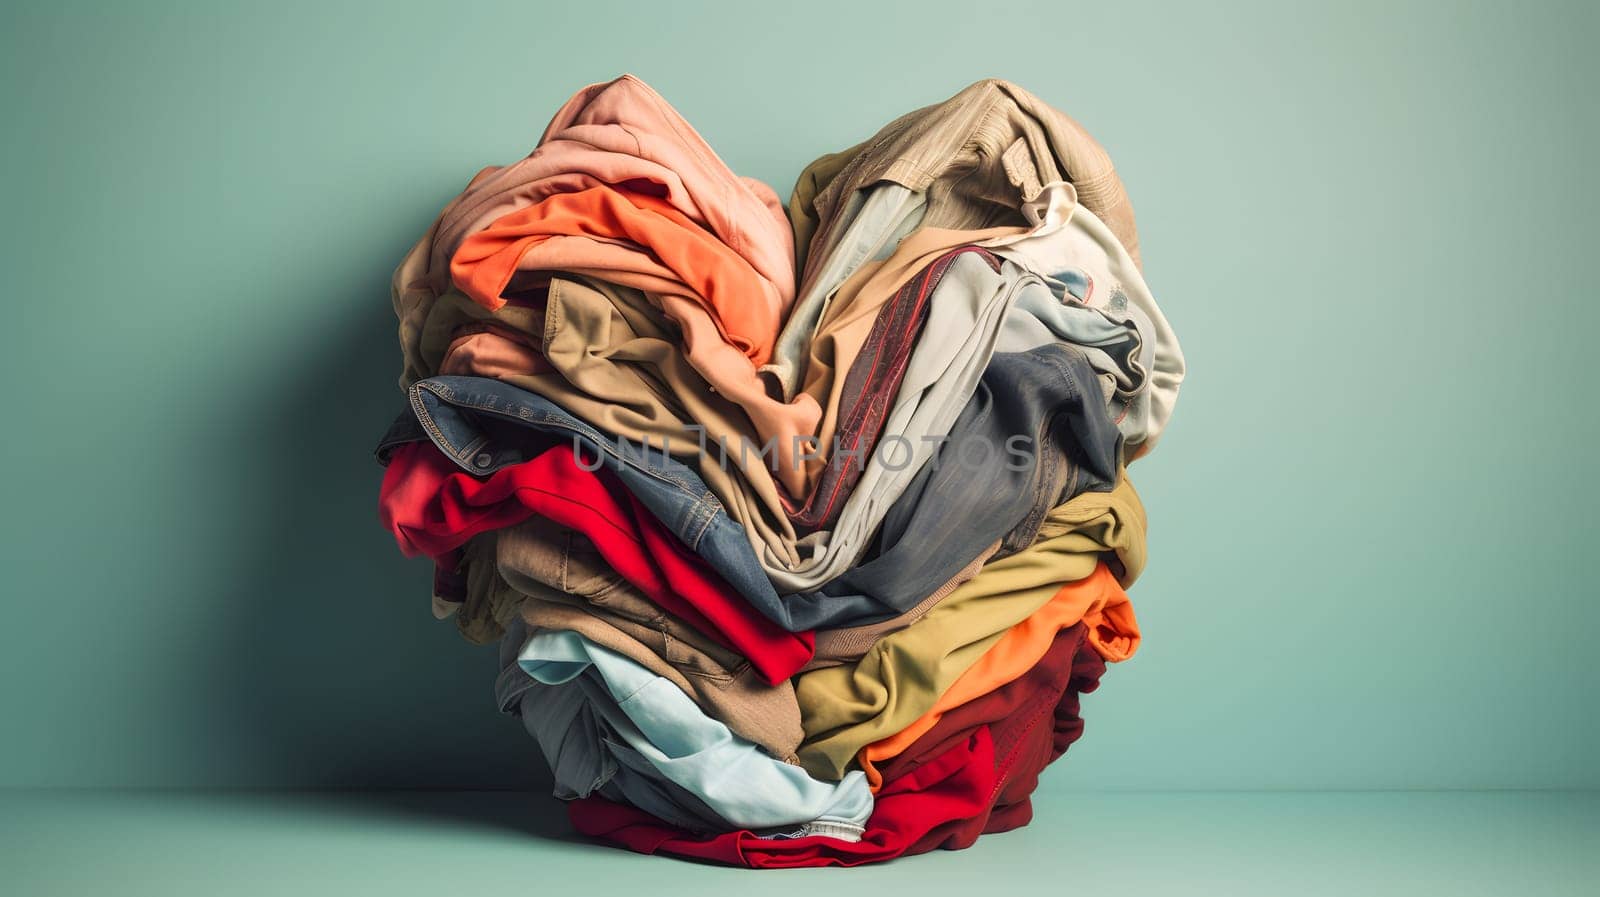 used clothes folded to form a heart on a light green background, neural network generated photorealistic image by z1b